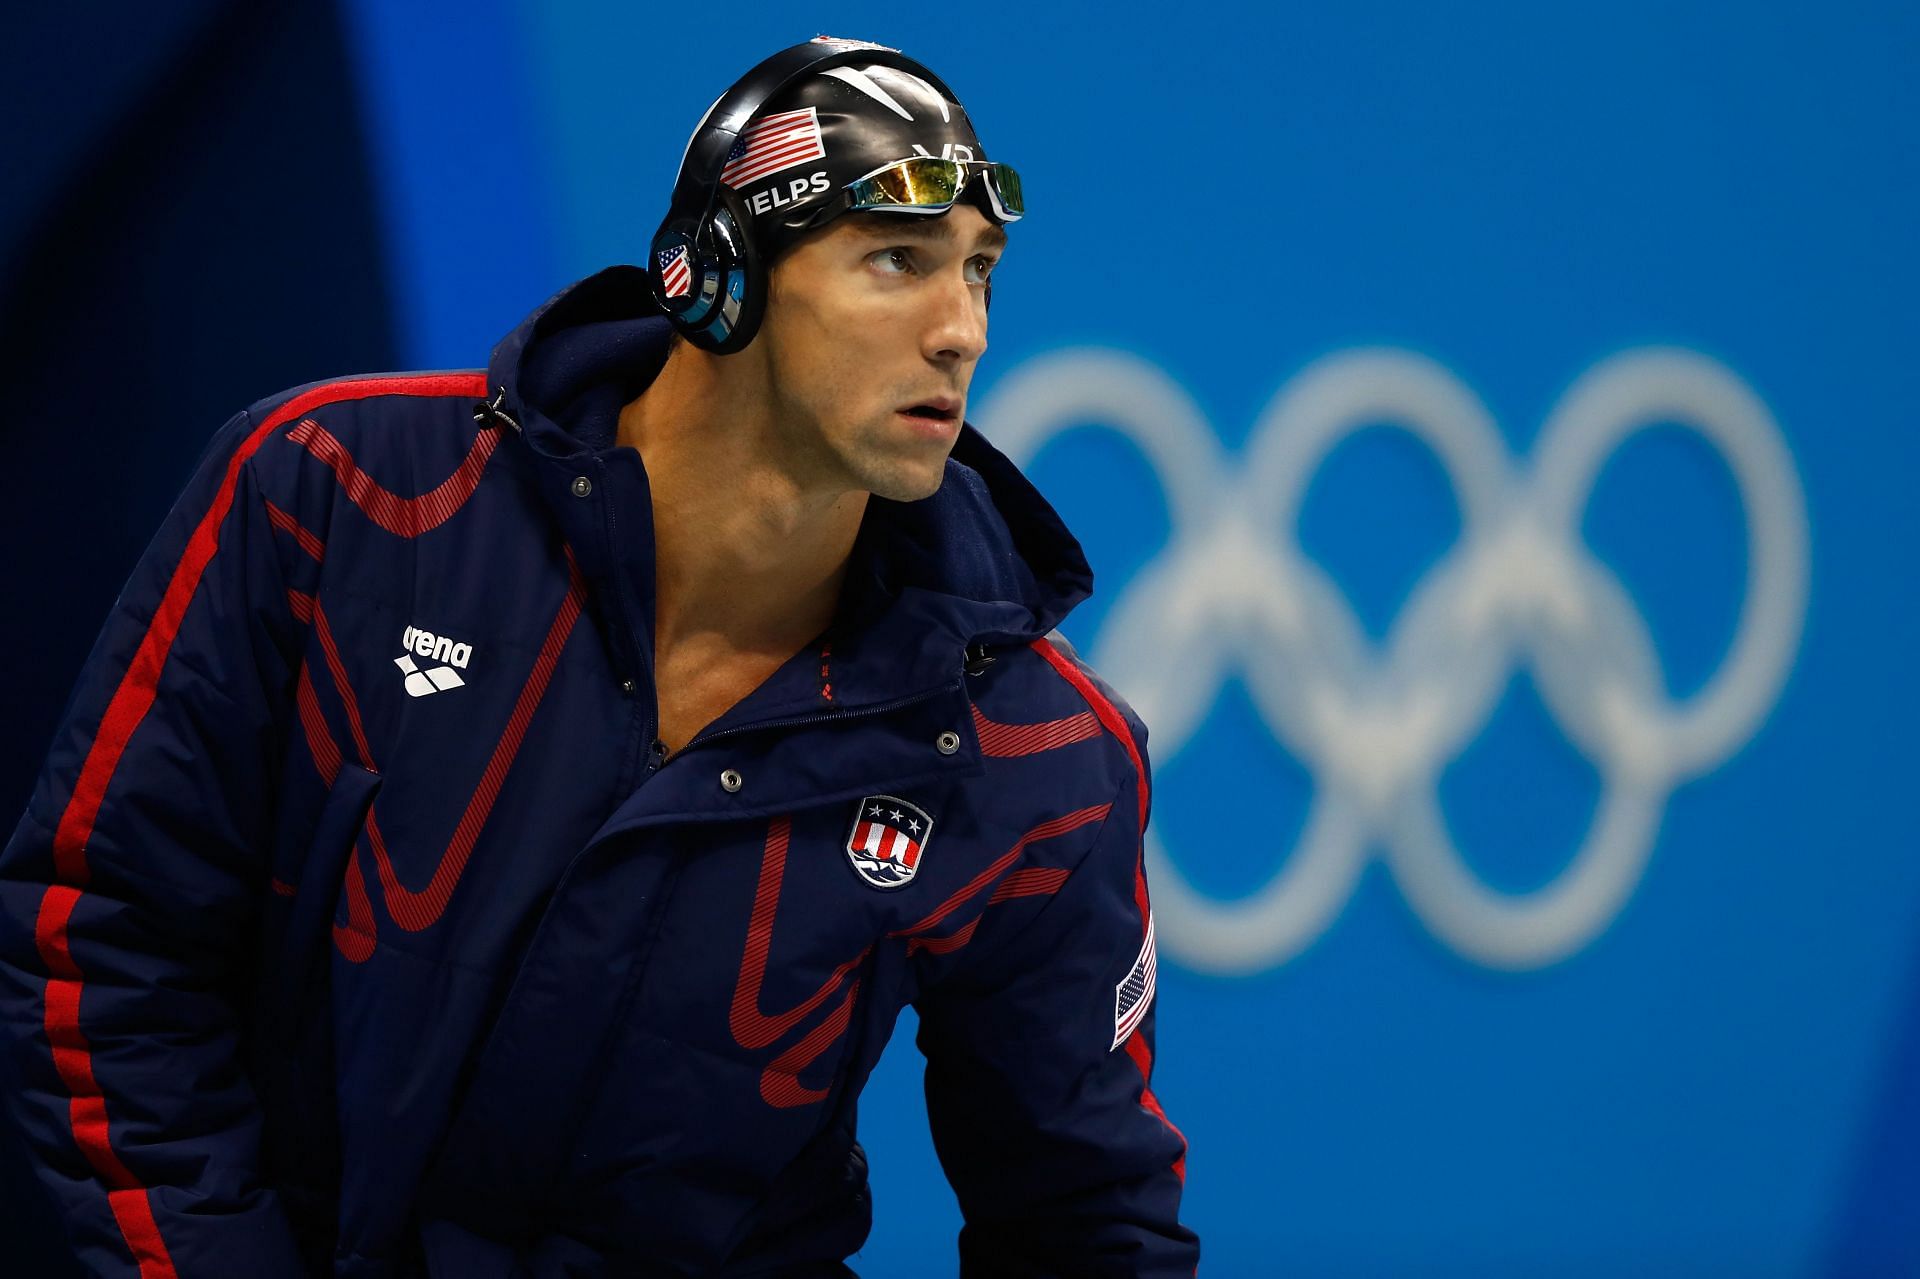 Swimming - Olympics: Day 7 (Image via Getty)